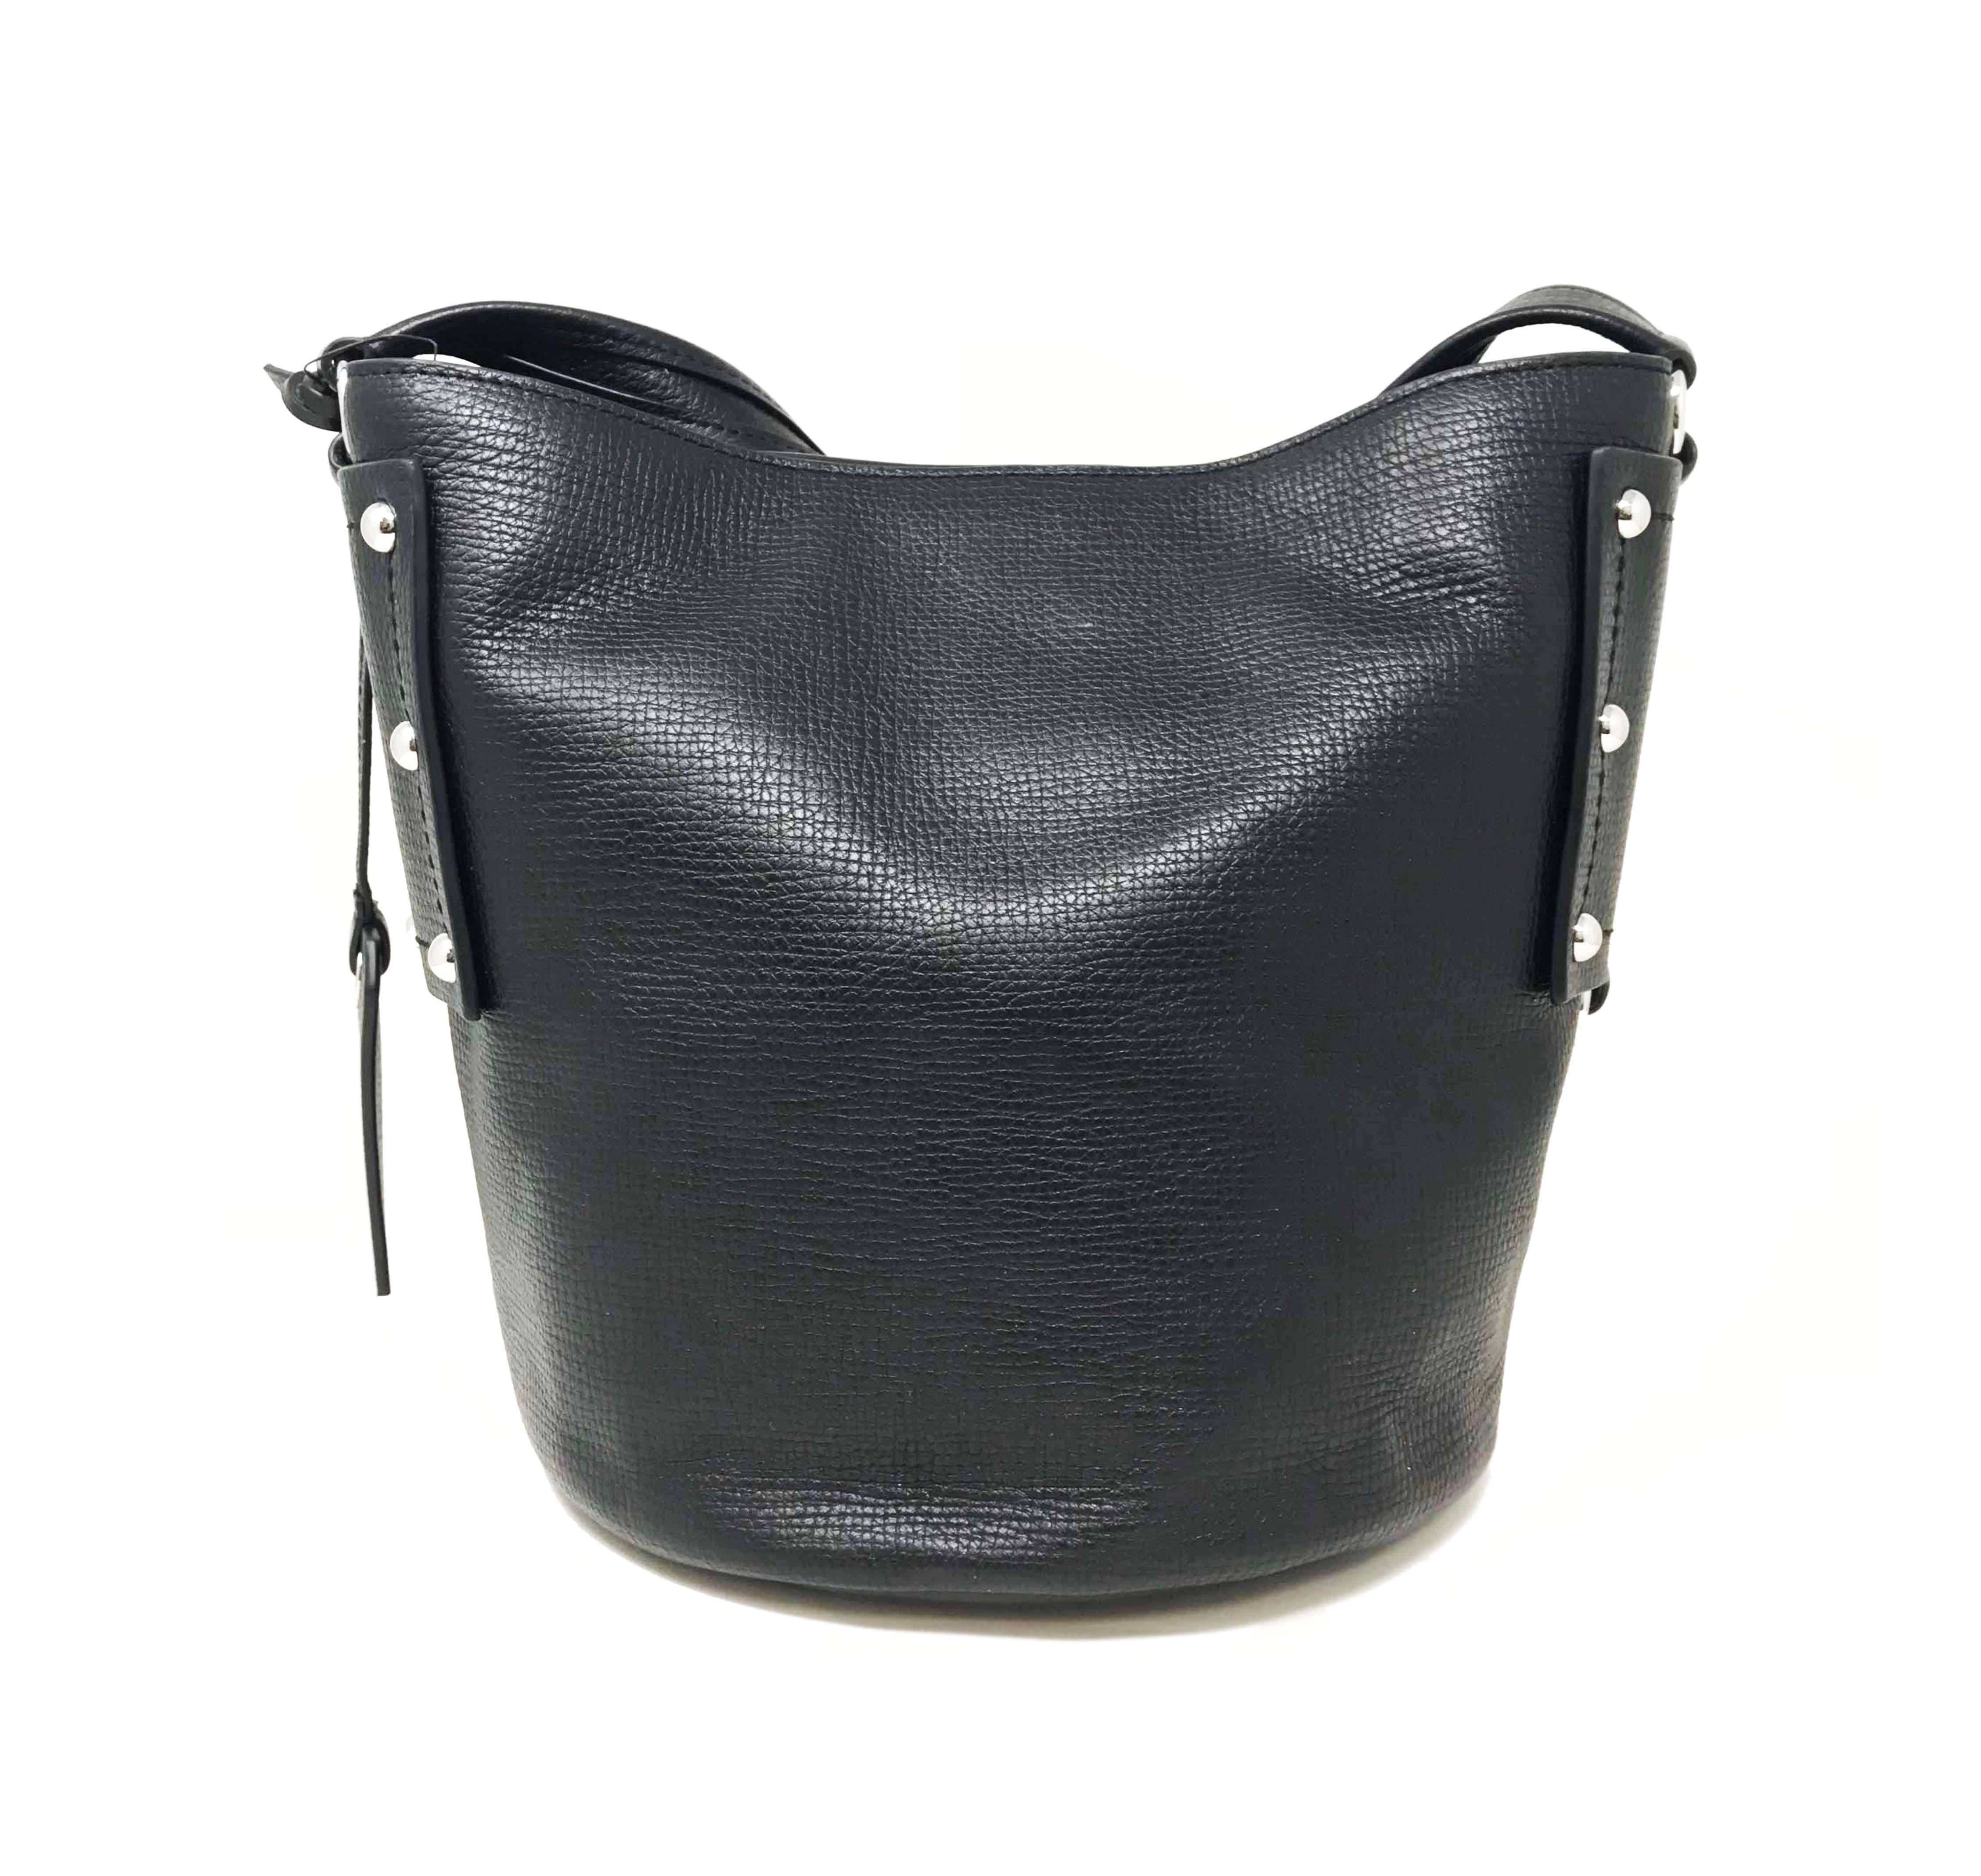 Details:
MSRP 345
Model Number M0007255-001
Brand Marc by Marc Jacobs
ColorBlack
Department Women
Material Leather
Style Crossbody
Size Medium
Pattern Solid
Closure Turn Lock
Vintage No 
SKU 018016
Features Adjustable Strap, Cross-Body Strap, Inner